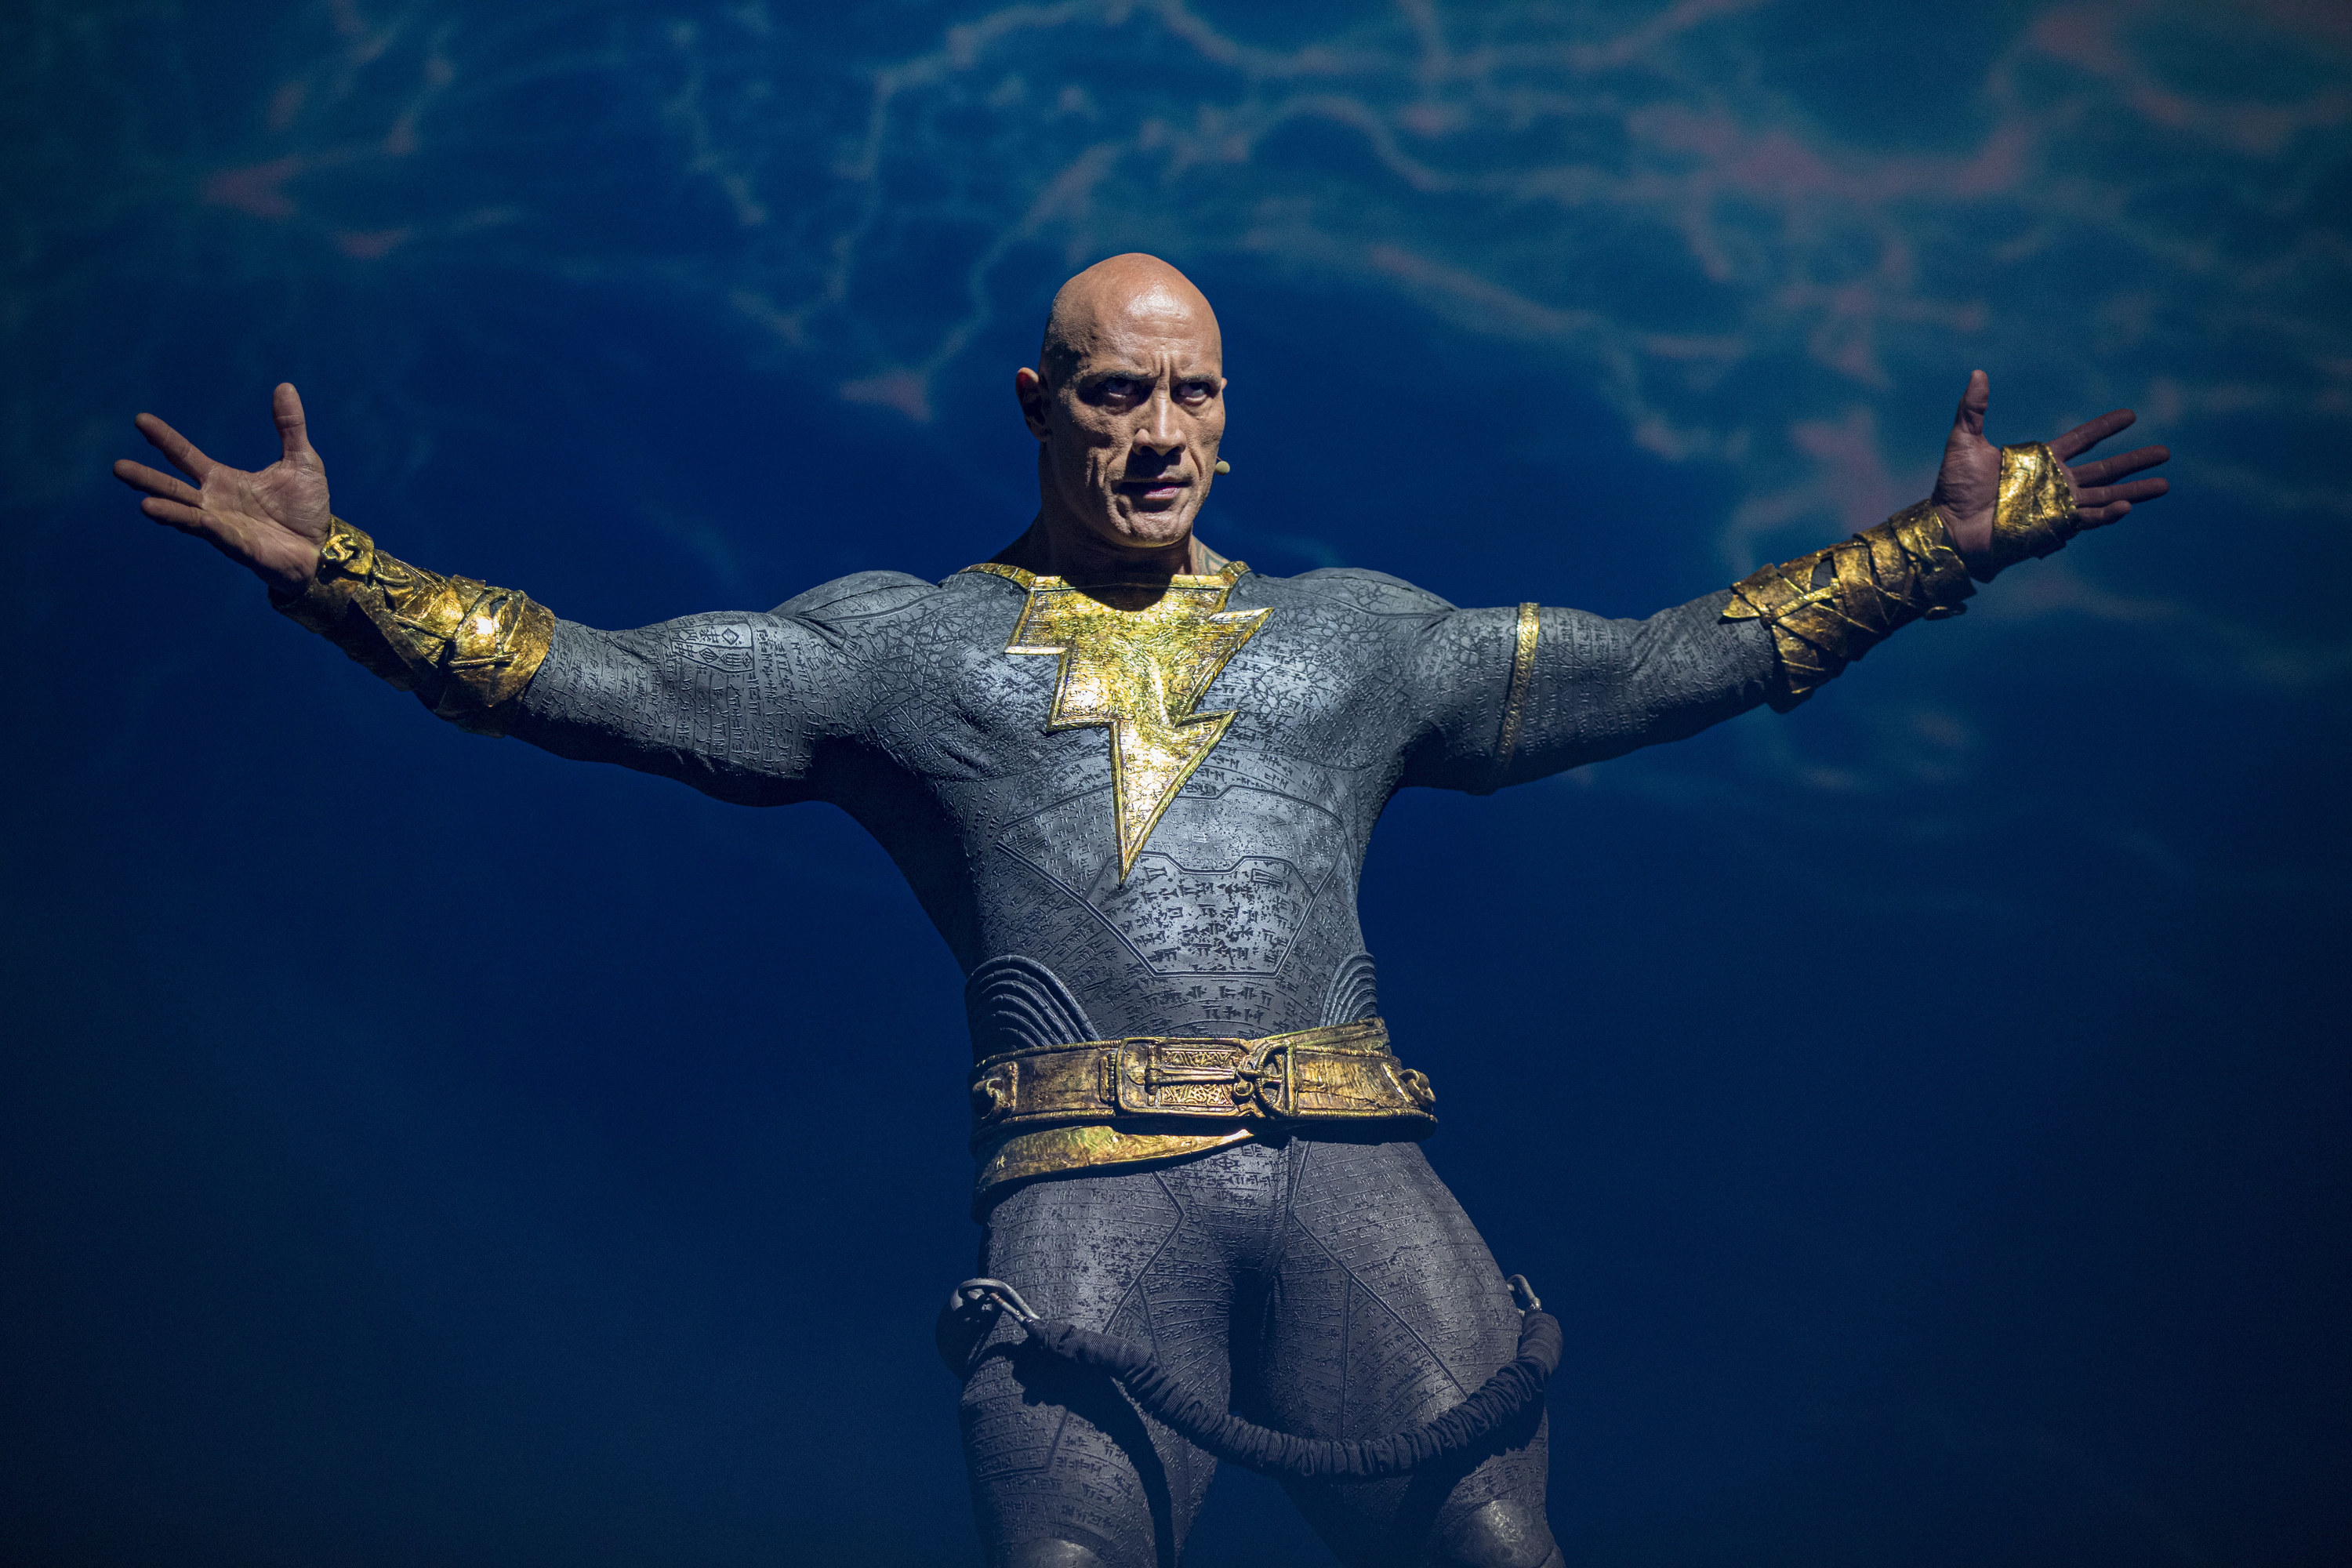 Dwayne wears his Black Adam costume on stage at an event